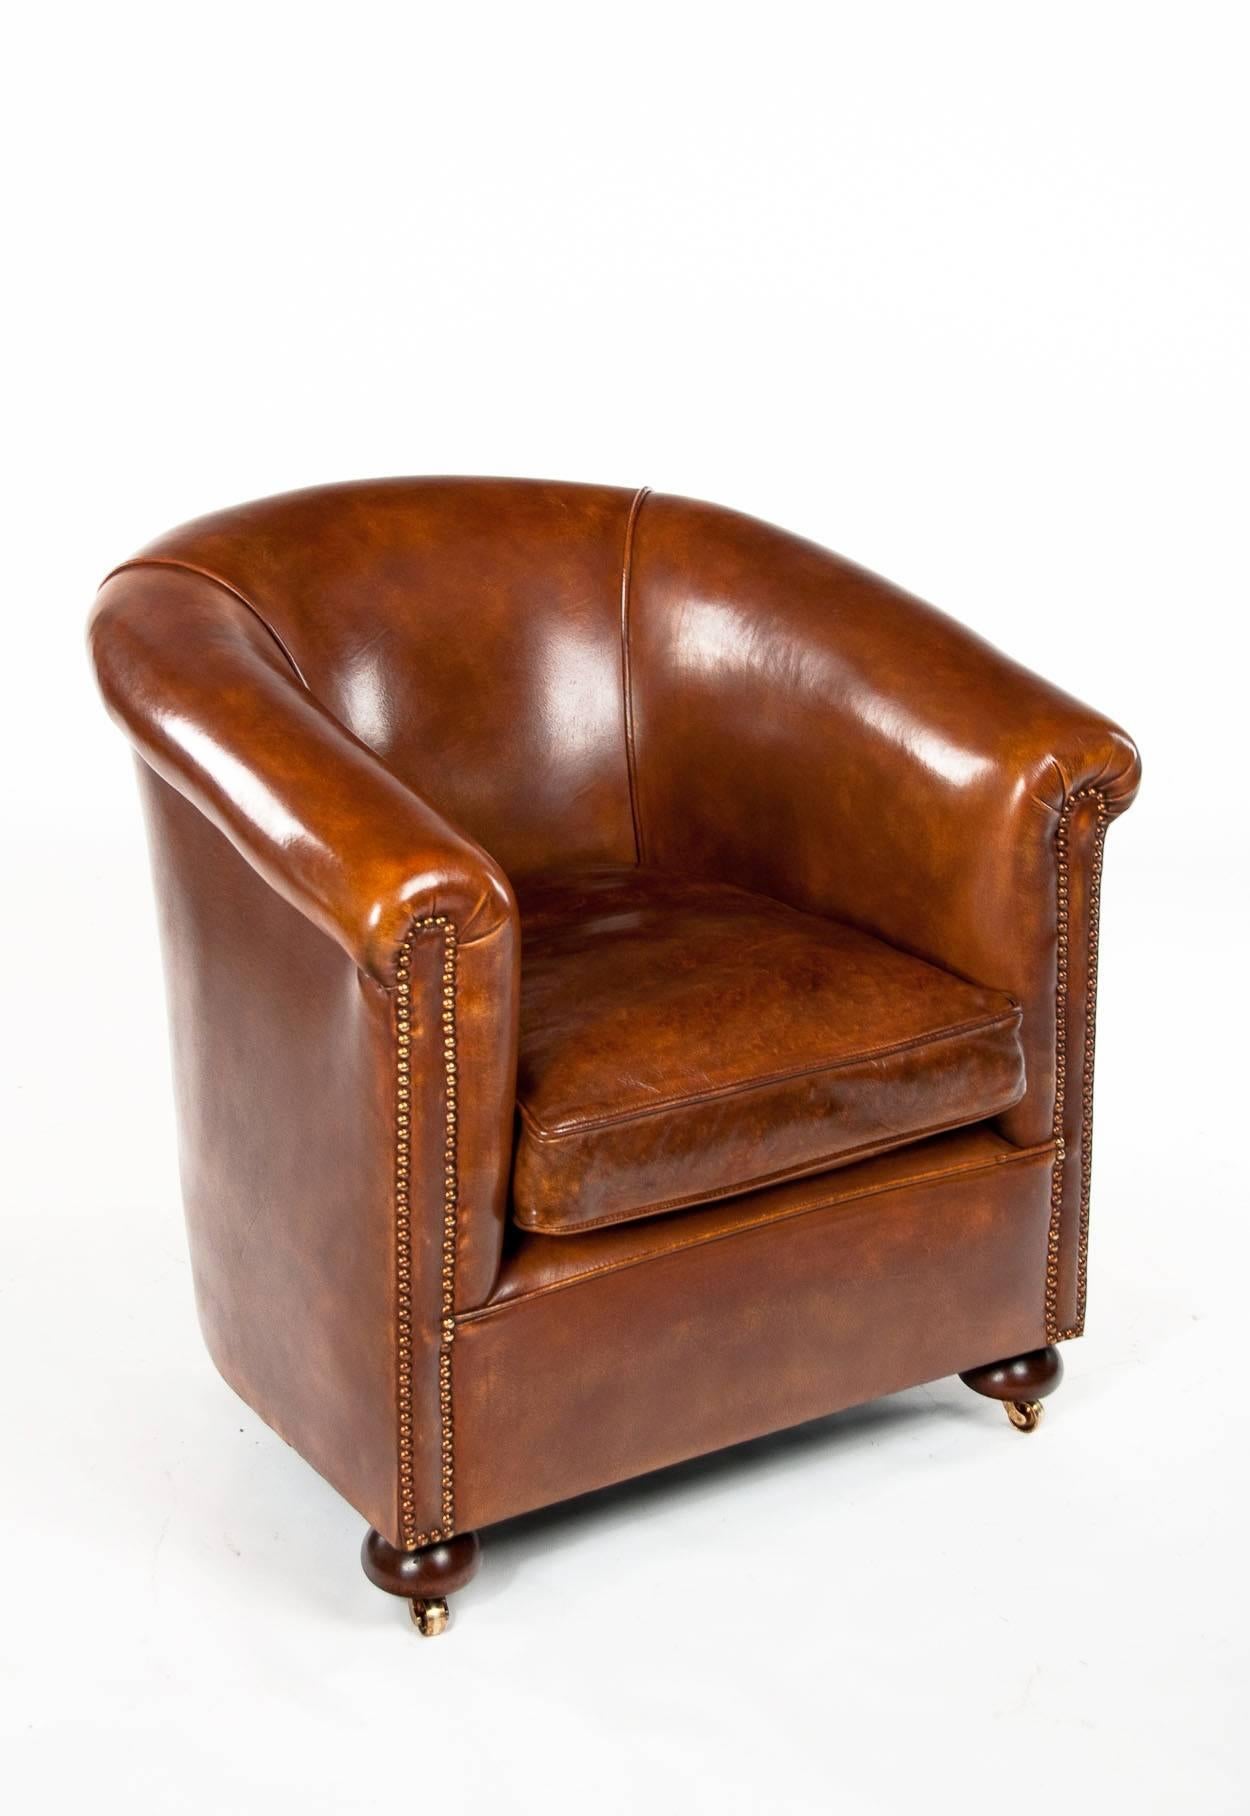 A Quality antique leather upholstered tub armchair. 
This leather upholstered tub armchair dating to circa 1920's has a rounded back with shaped arms and brass nailed studding. The leather chair being tub shaped is always a rarer and harder to find